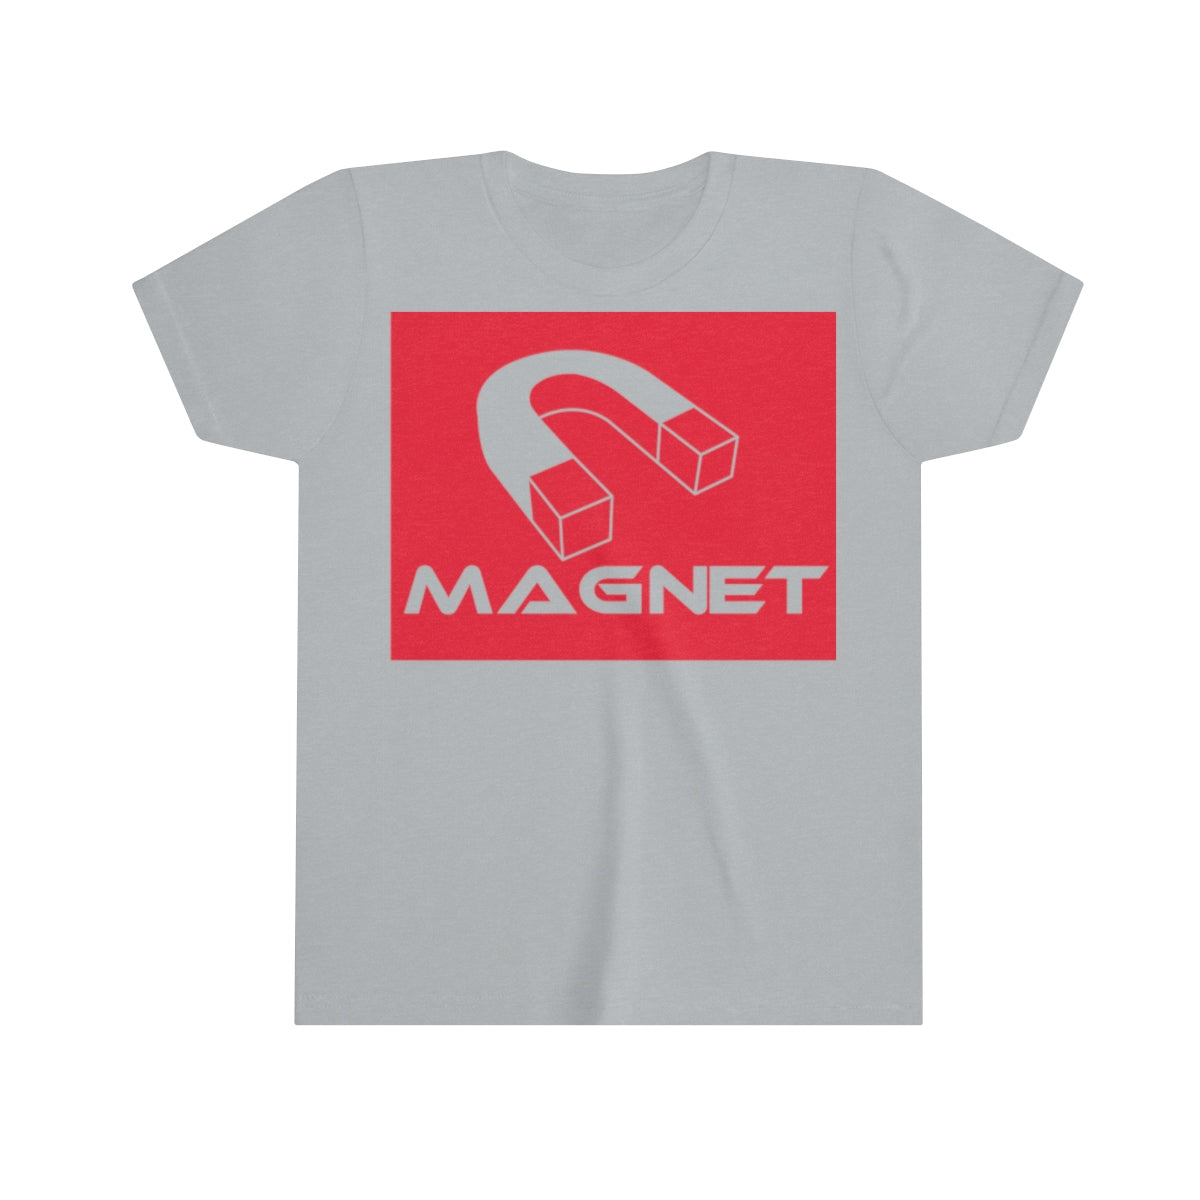 MAGNET Youth Short Sleeve Tee xccscss.